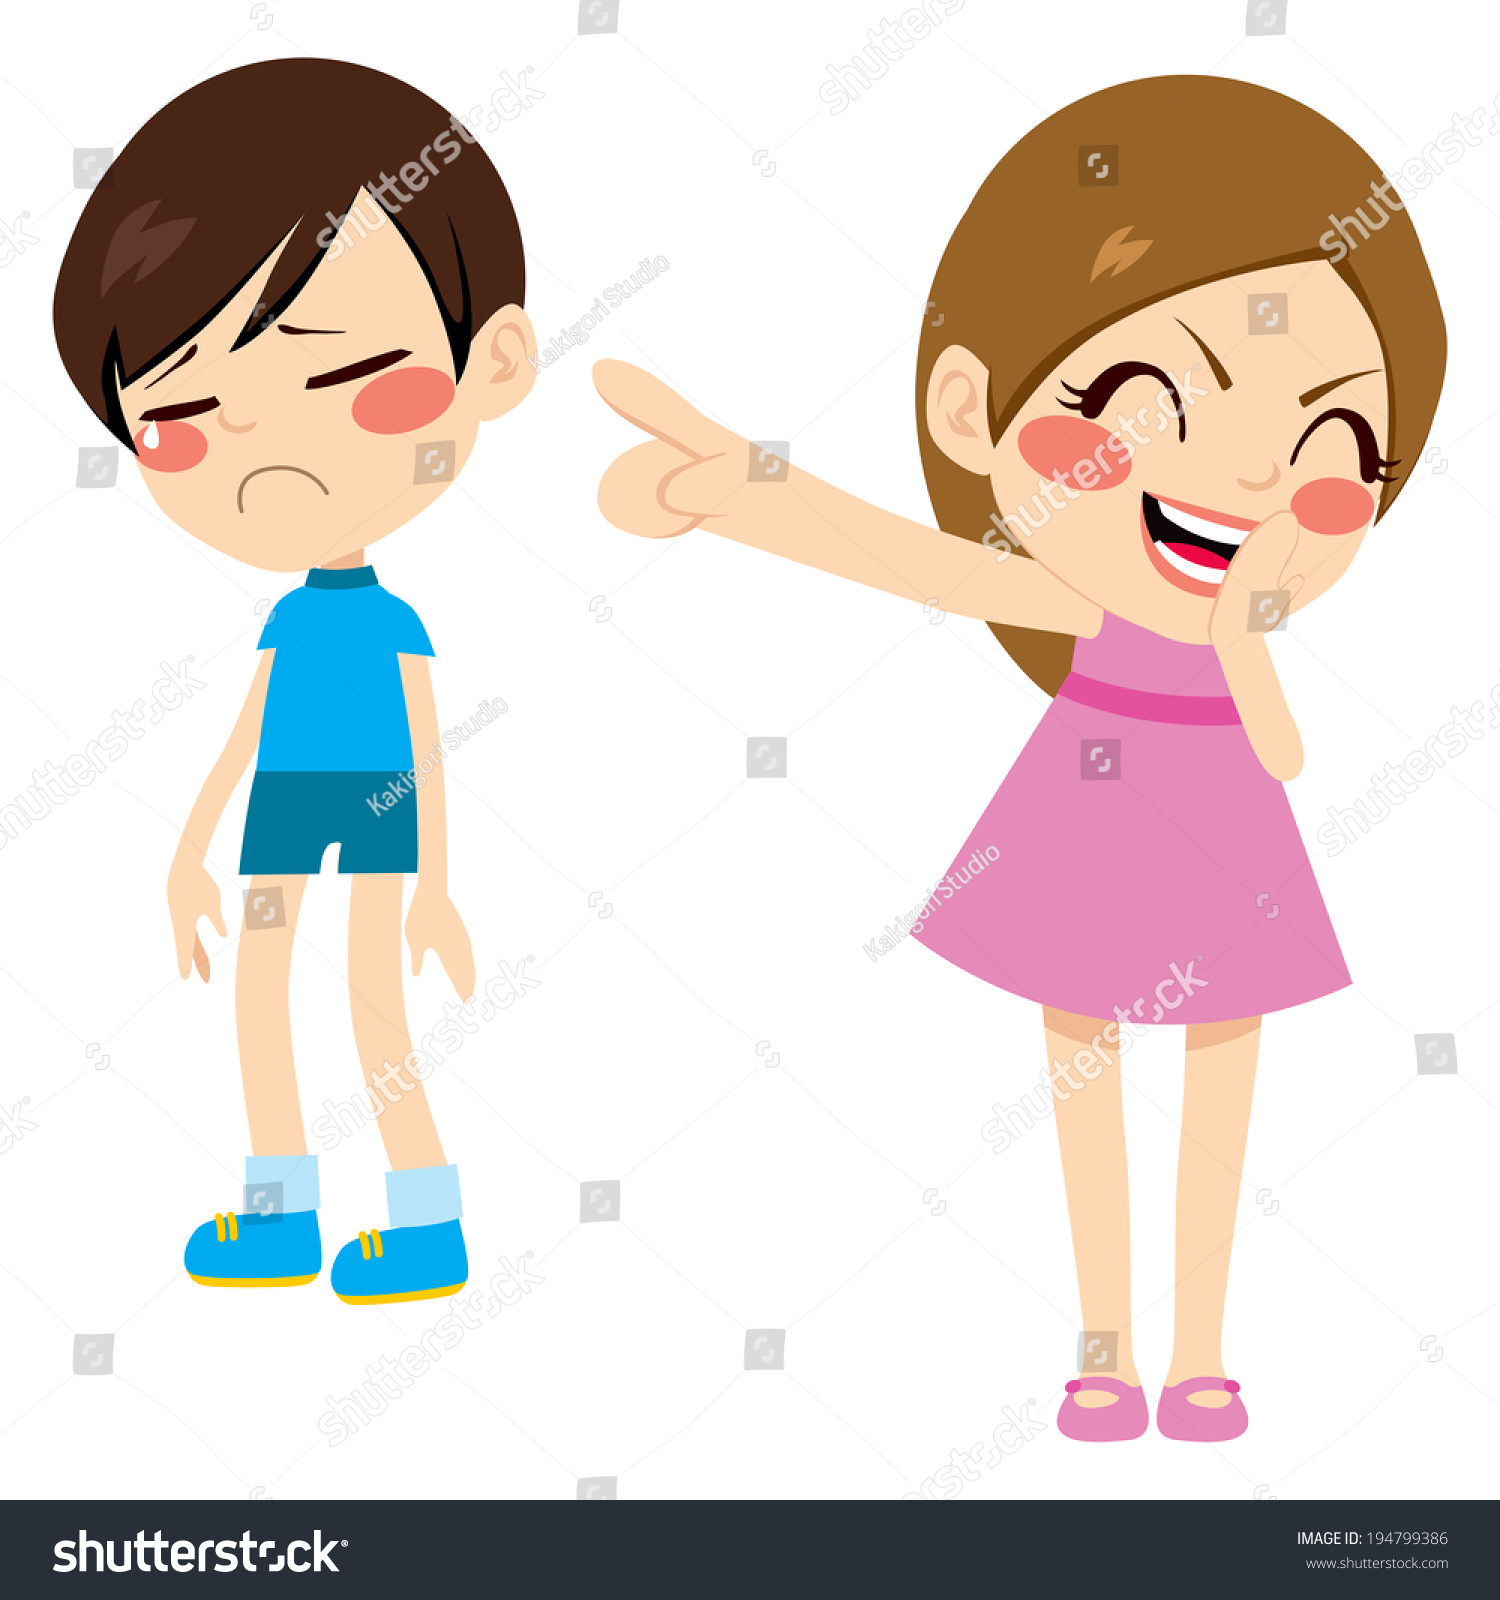 boy and girl fighting clipart - photo #47